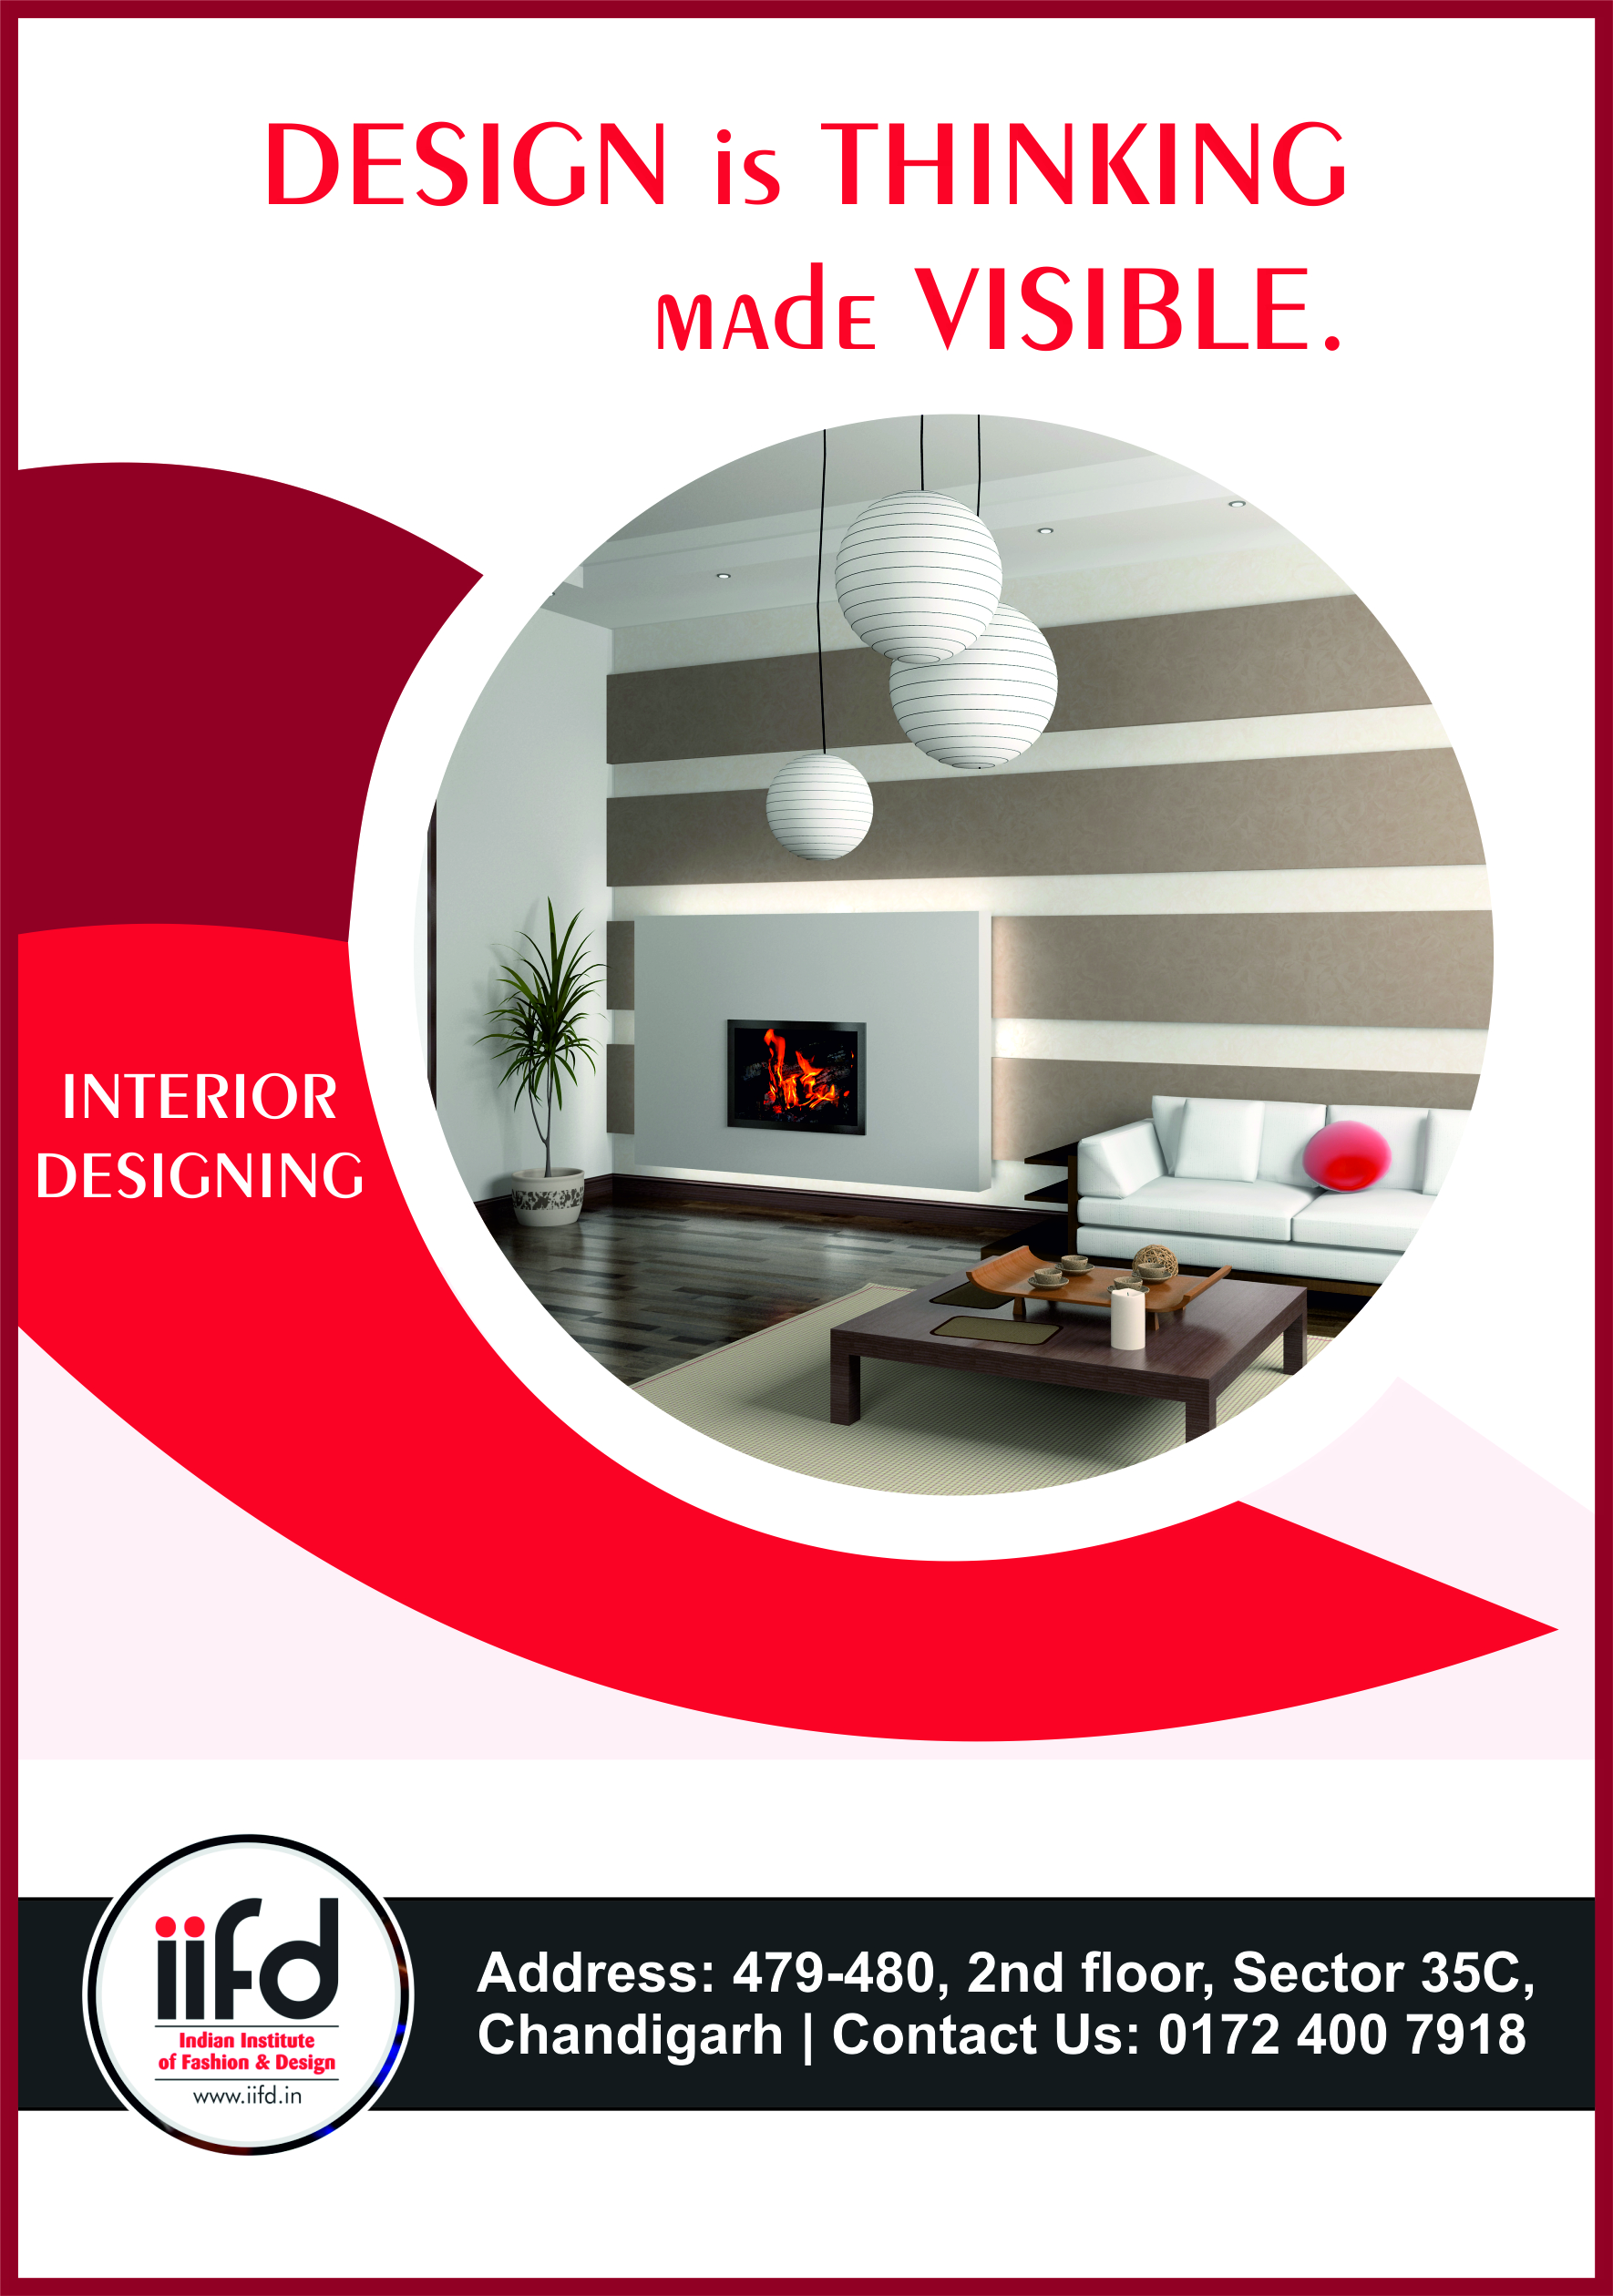 Learn Interior Designing Hacks For Small Dwellings At Iifd